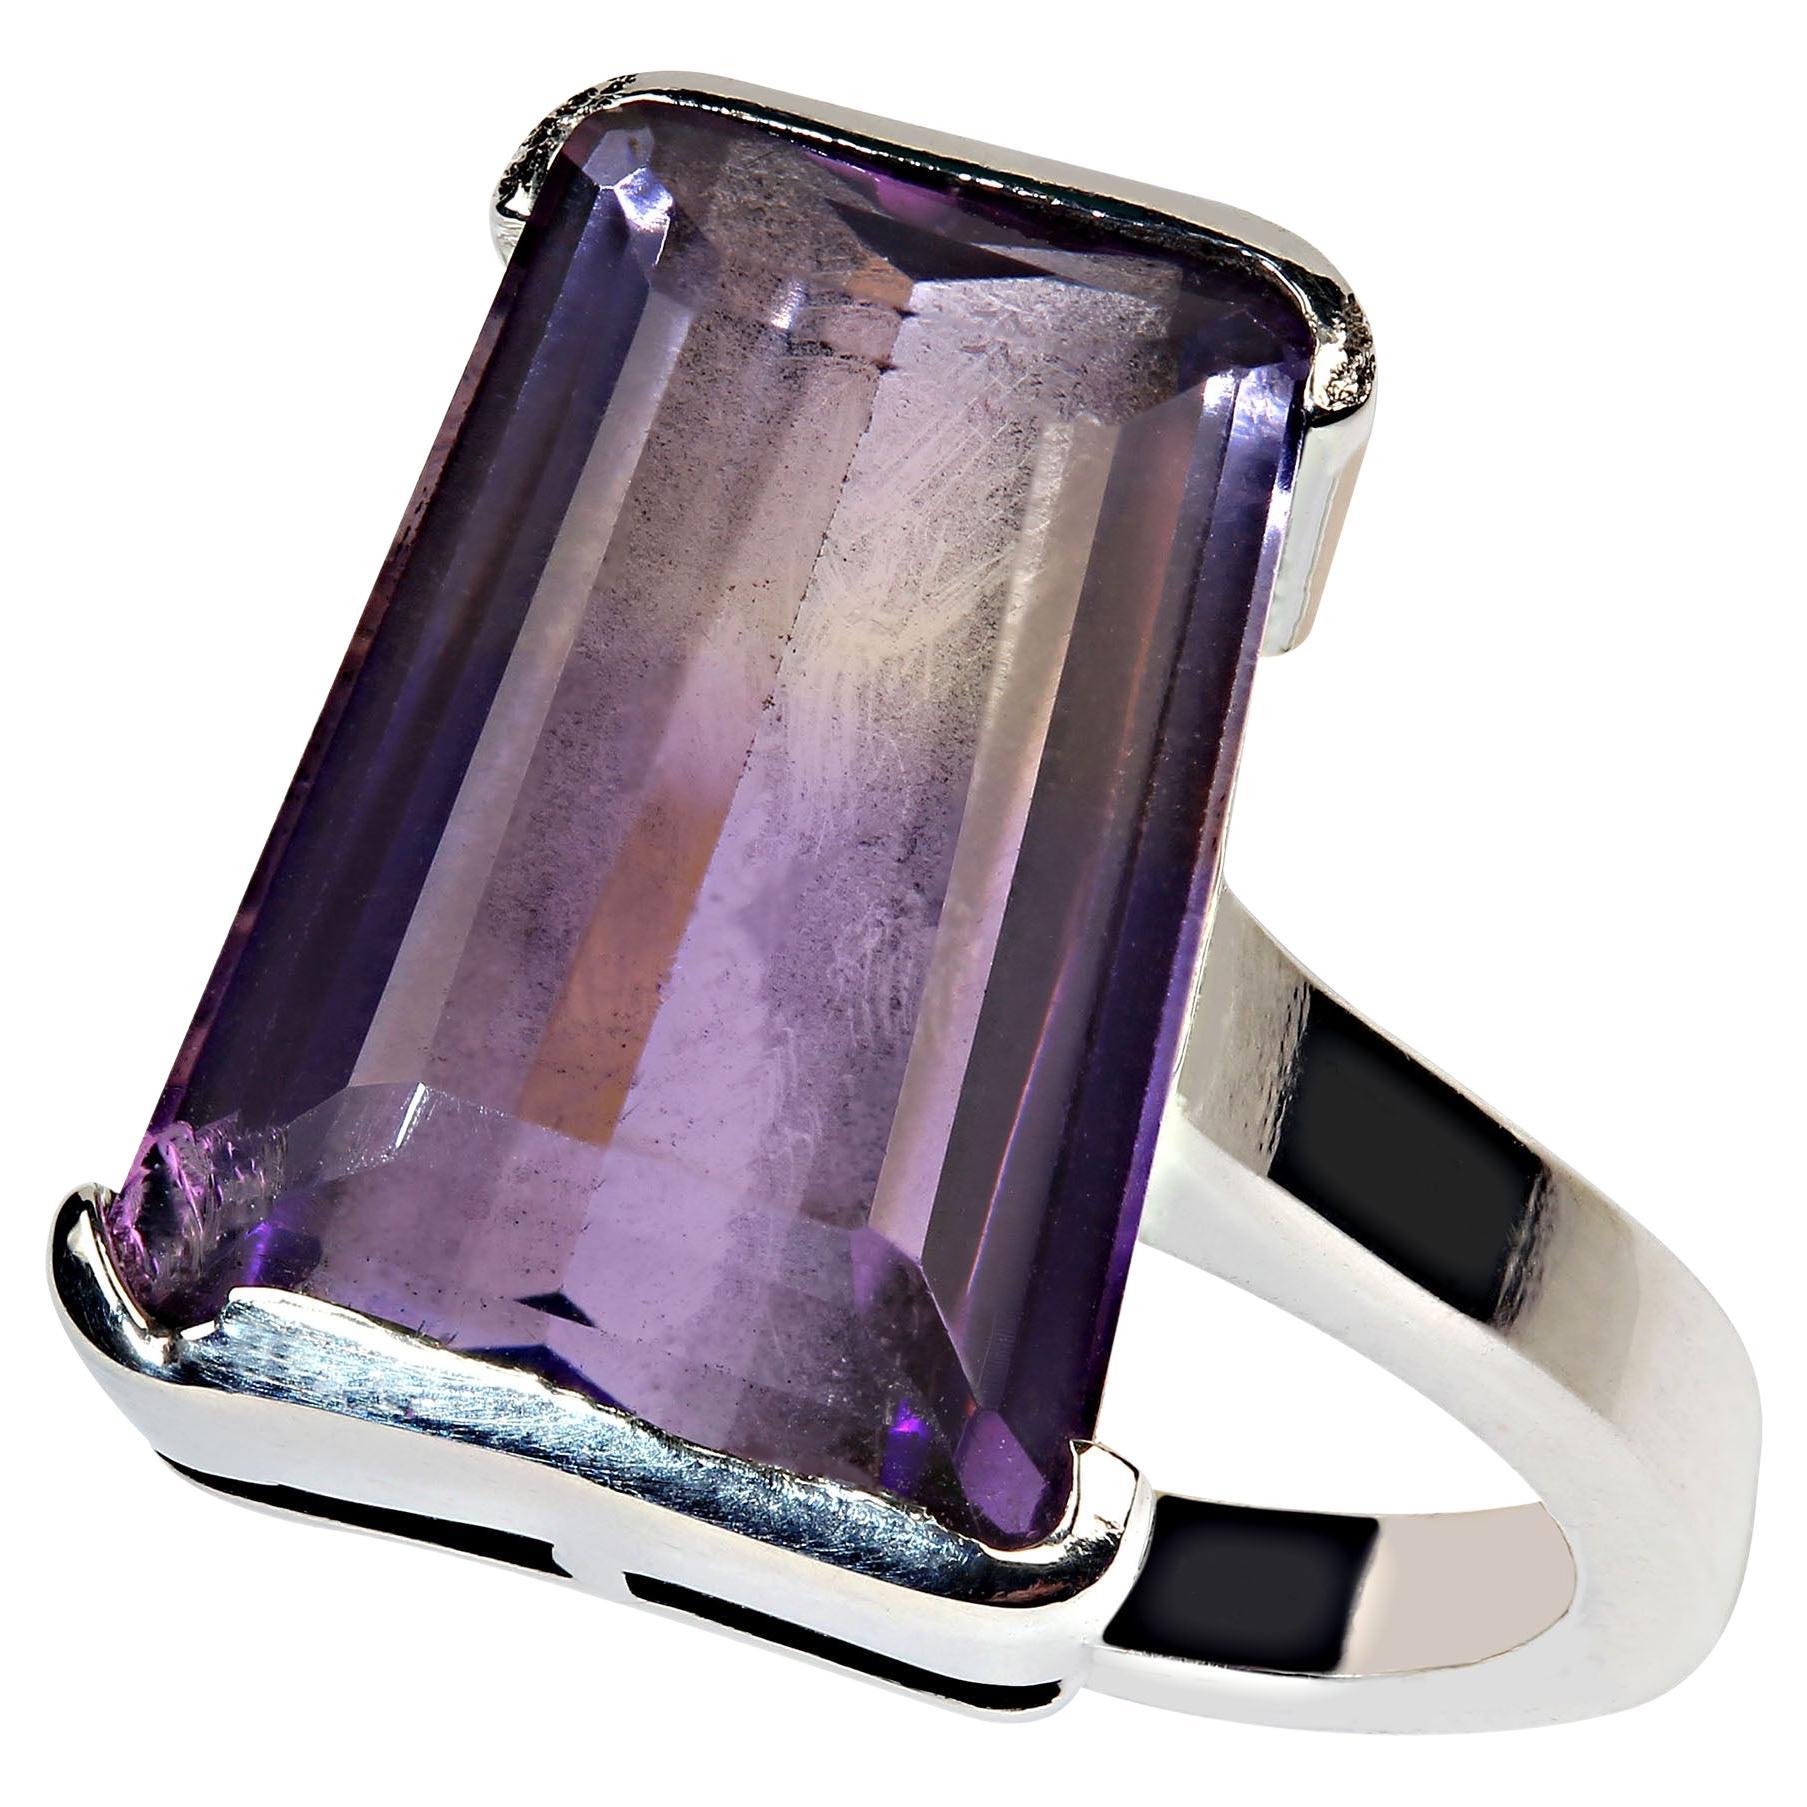 10Ct awesome Ametrine trapezoid Sterling Silver ring.  This interesting Ametrine is set in a half bezel, just the top and bottom, so that the sides are open to lots of light.  The elegant sterling silver band covers both the north and south edges of